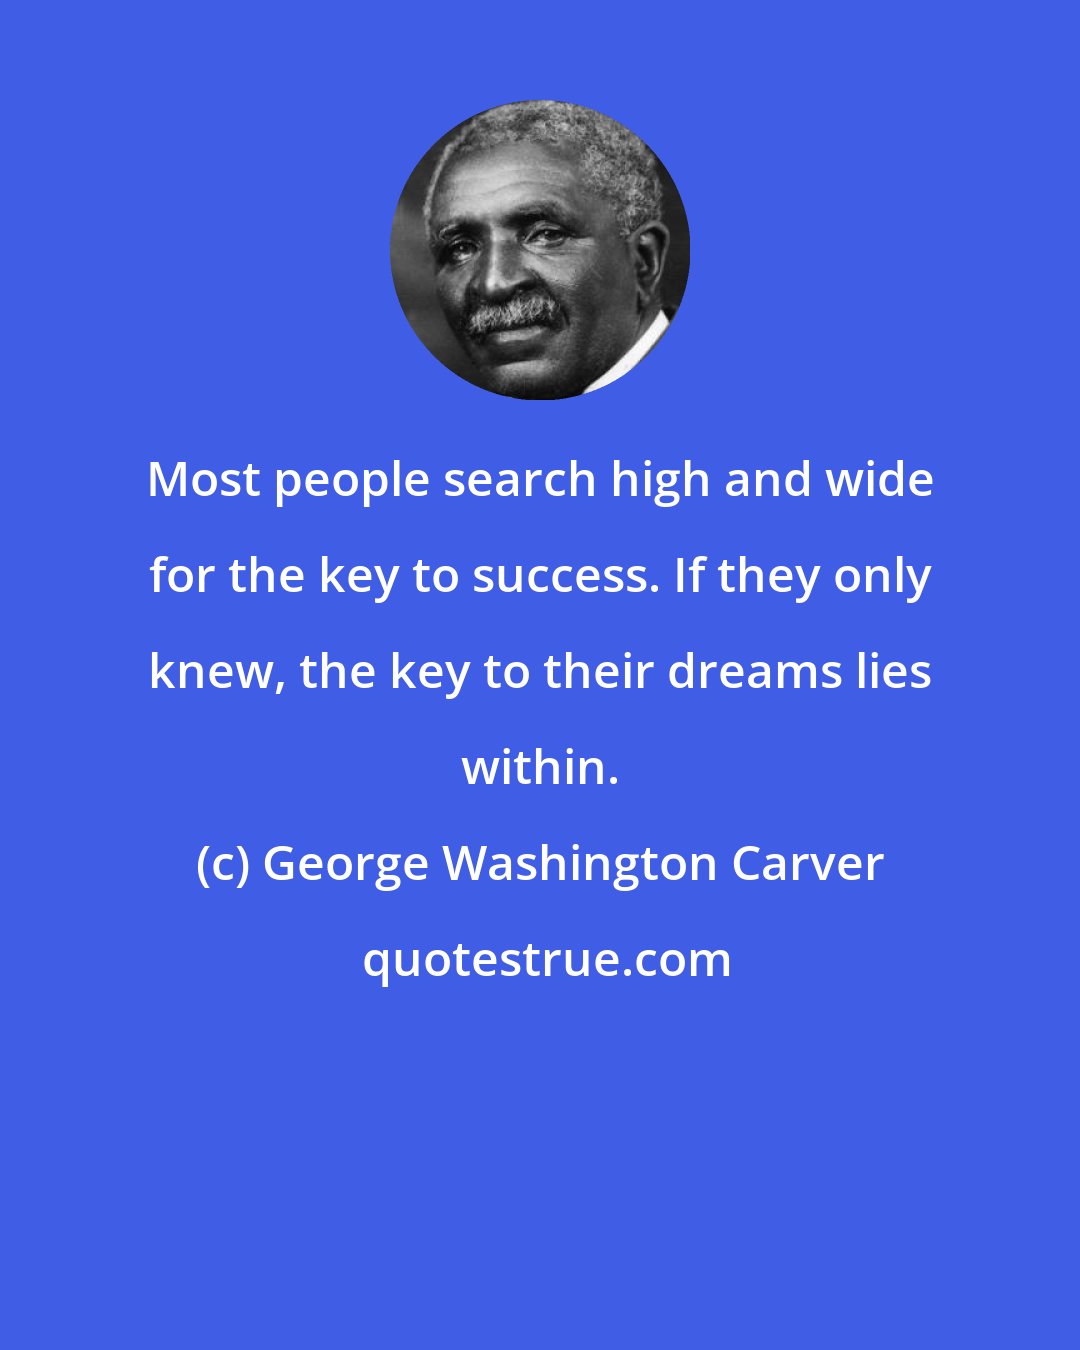 George Washington Carver: Most people search high and wide for the key to success. If they only knew, the key to their dreams lies within.